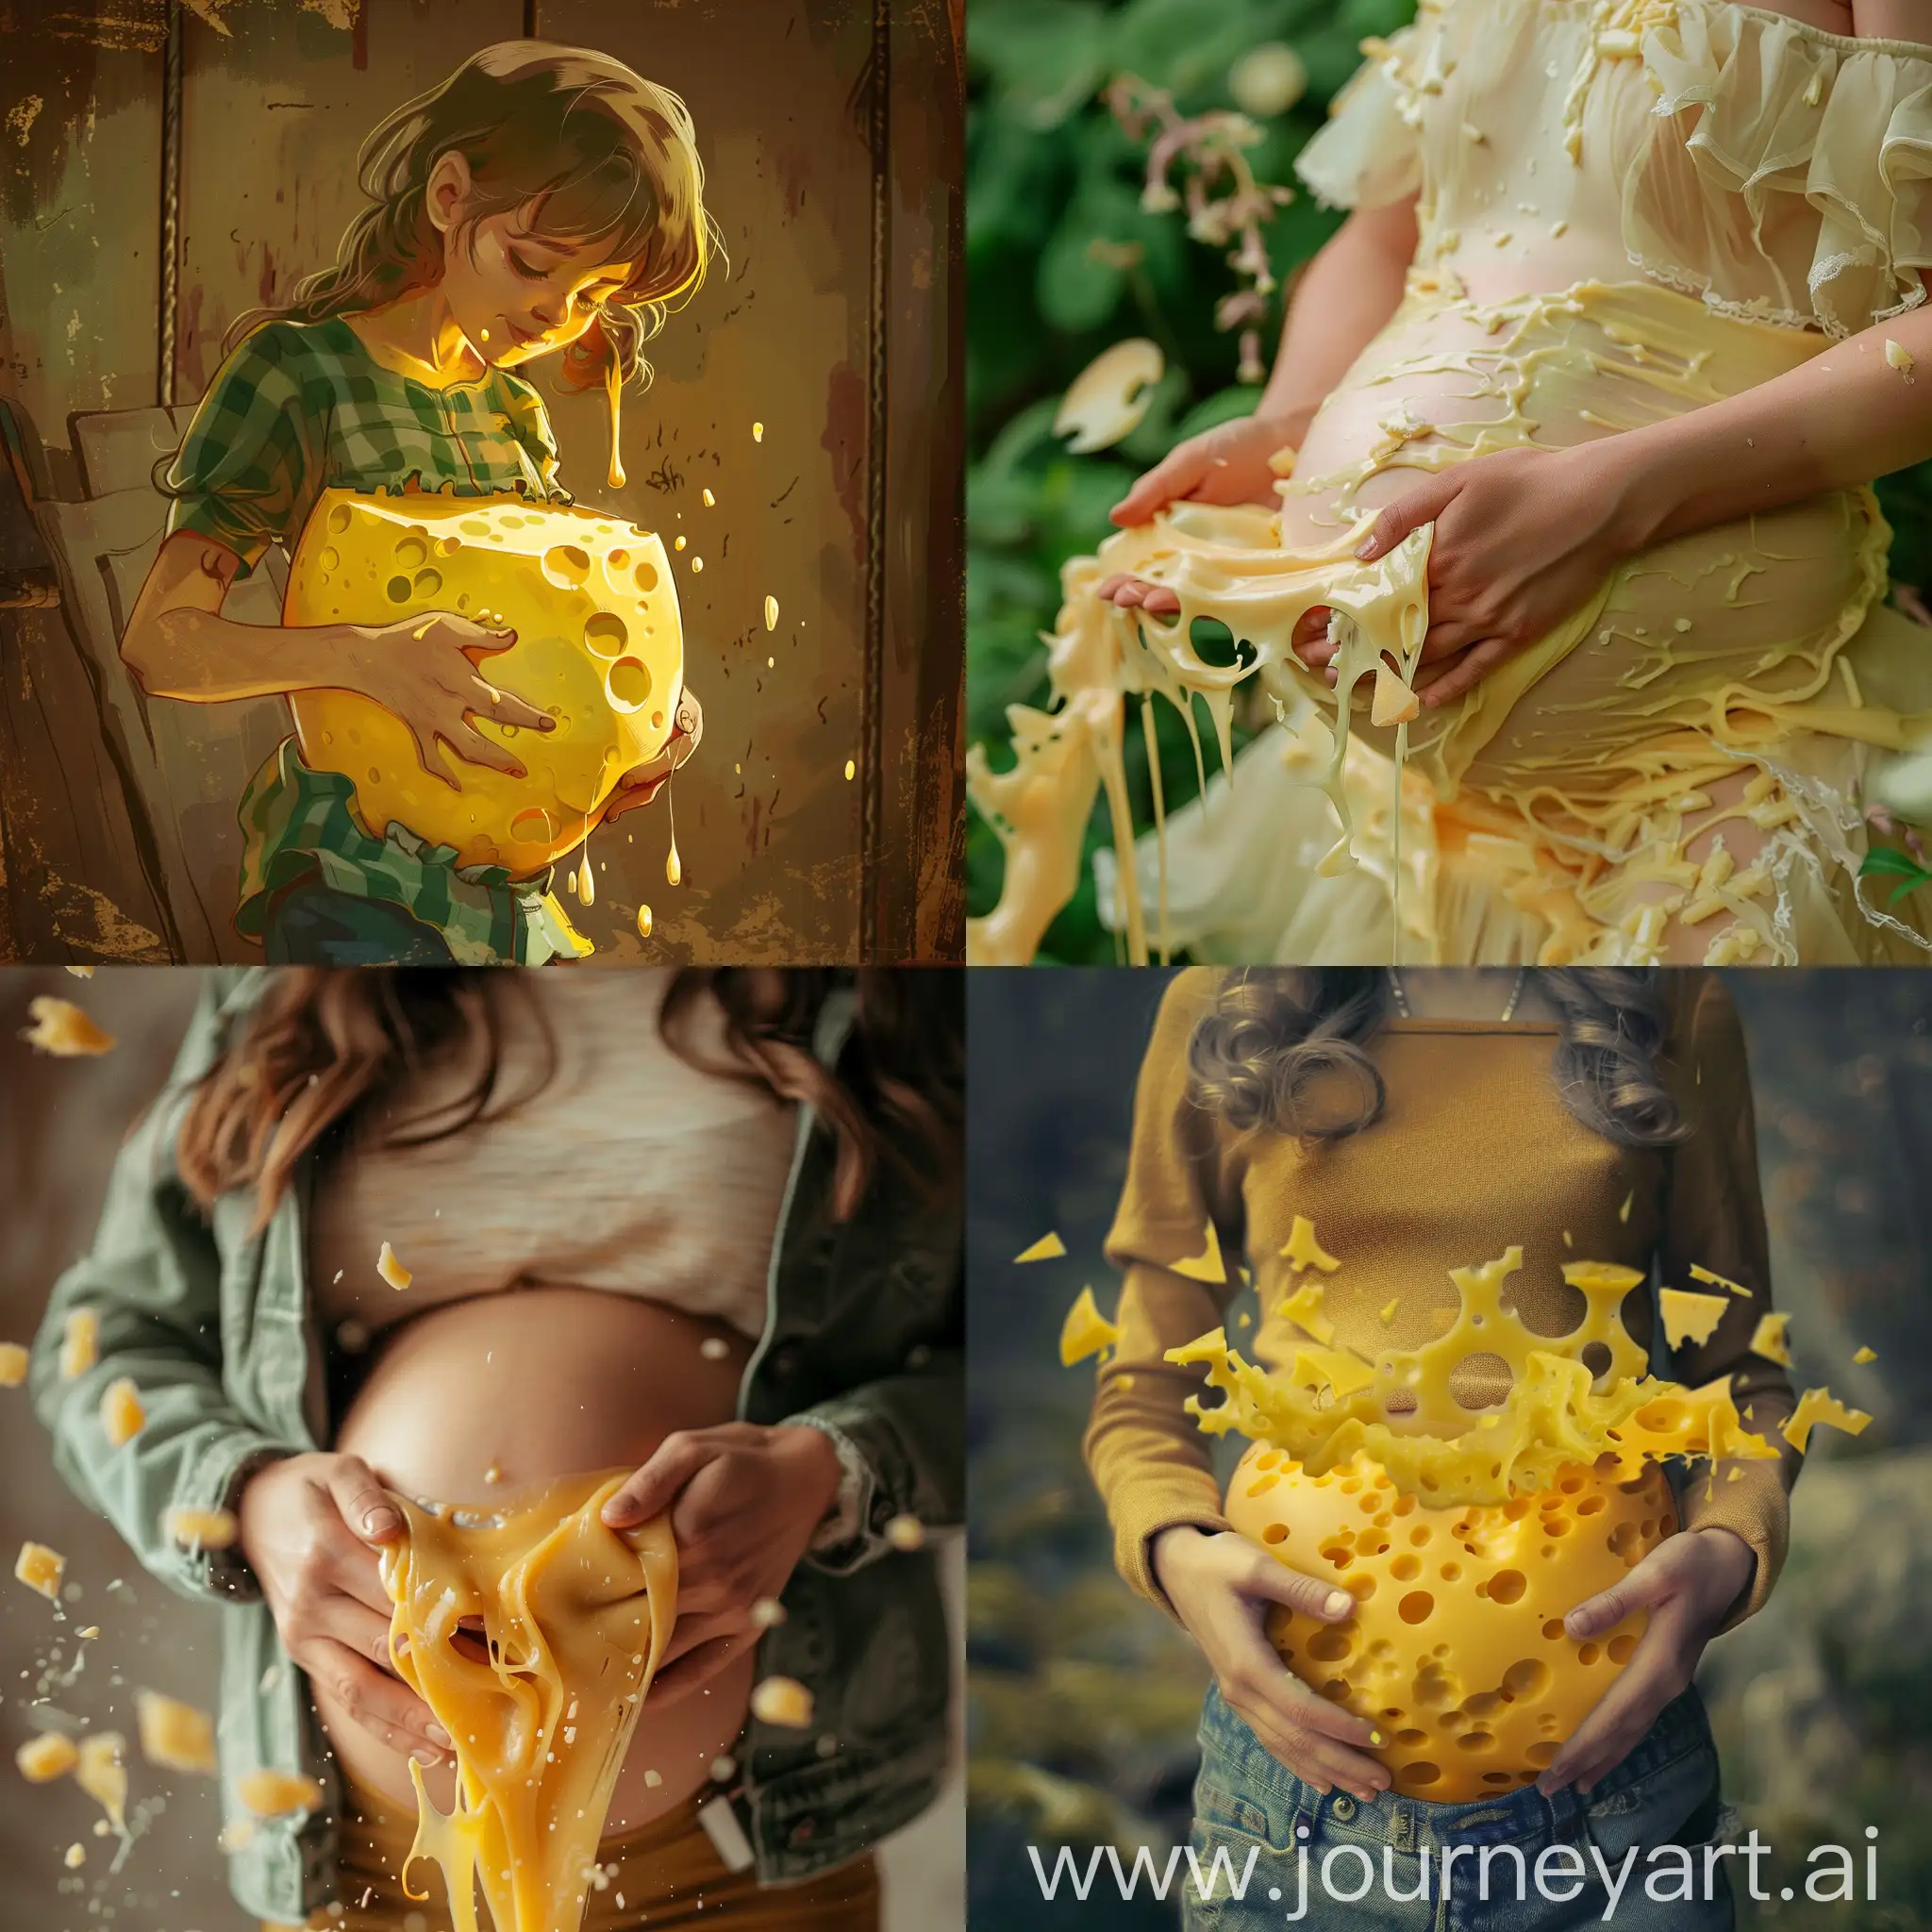 Cheese-Flowing-Belly-Whimsical-Portrait-of-a-Girl-with-Unusual-Appetite